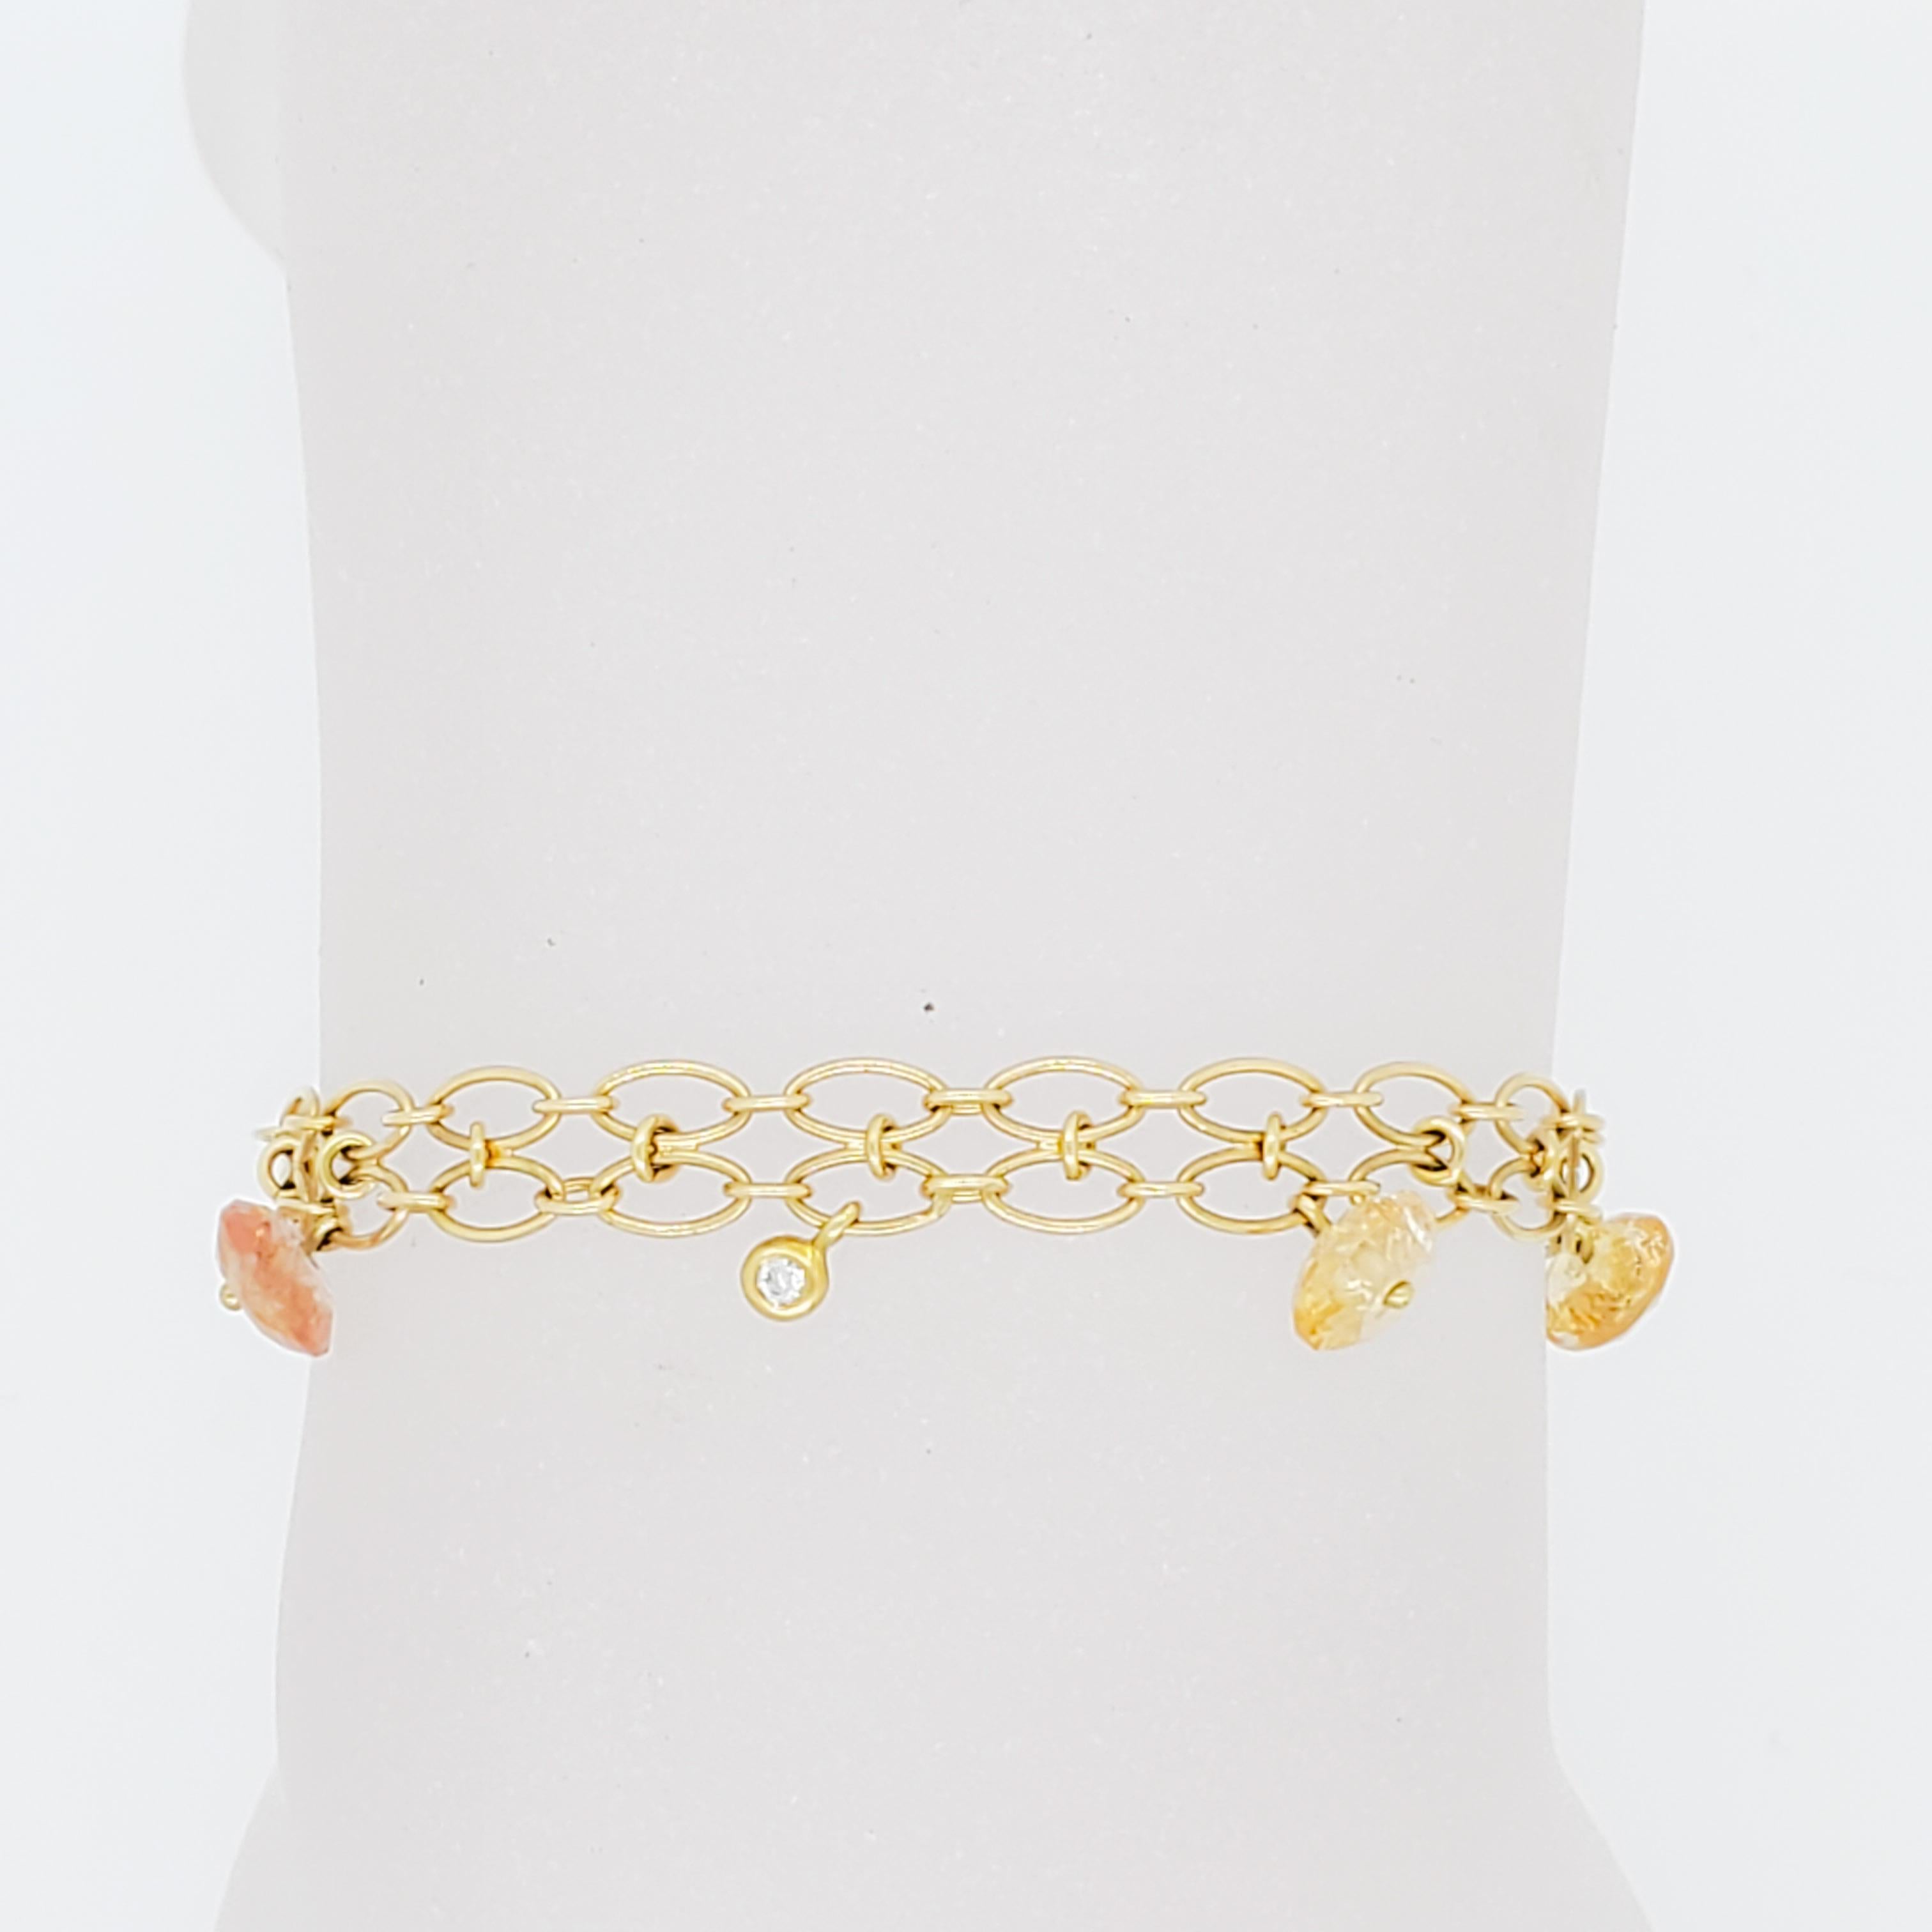 Gorgeous H. Stern estate bracelet with flower beads and 0.01 ct. diamond round bezel in the middle.  Handmade in 18k yellow gold.   Length is 5.75